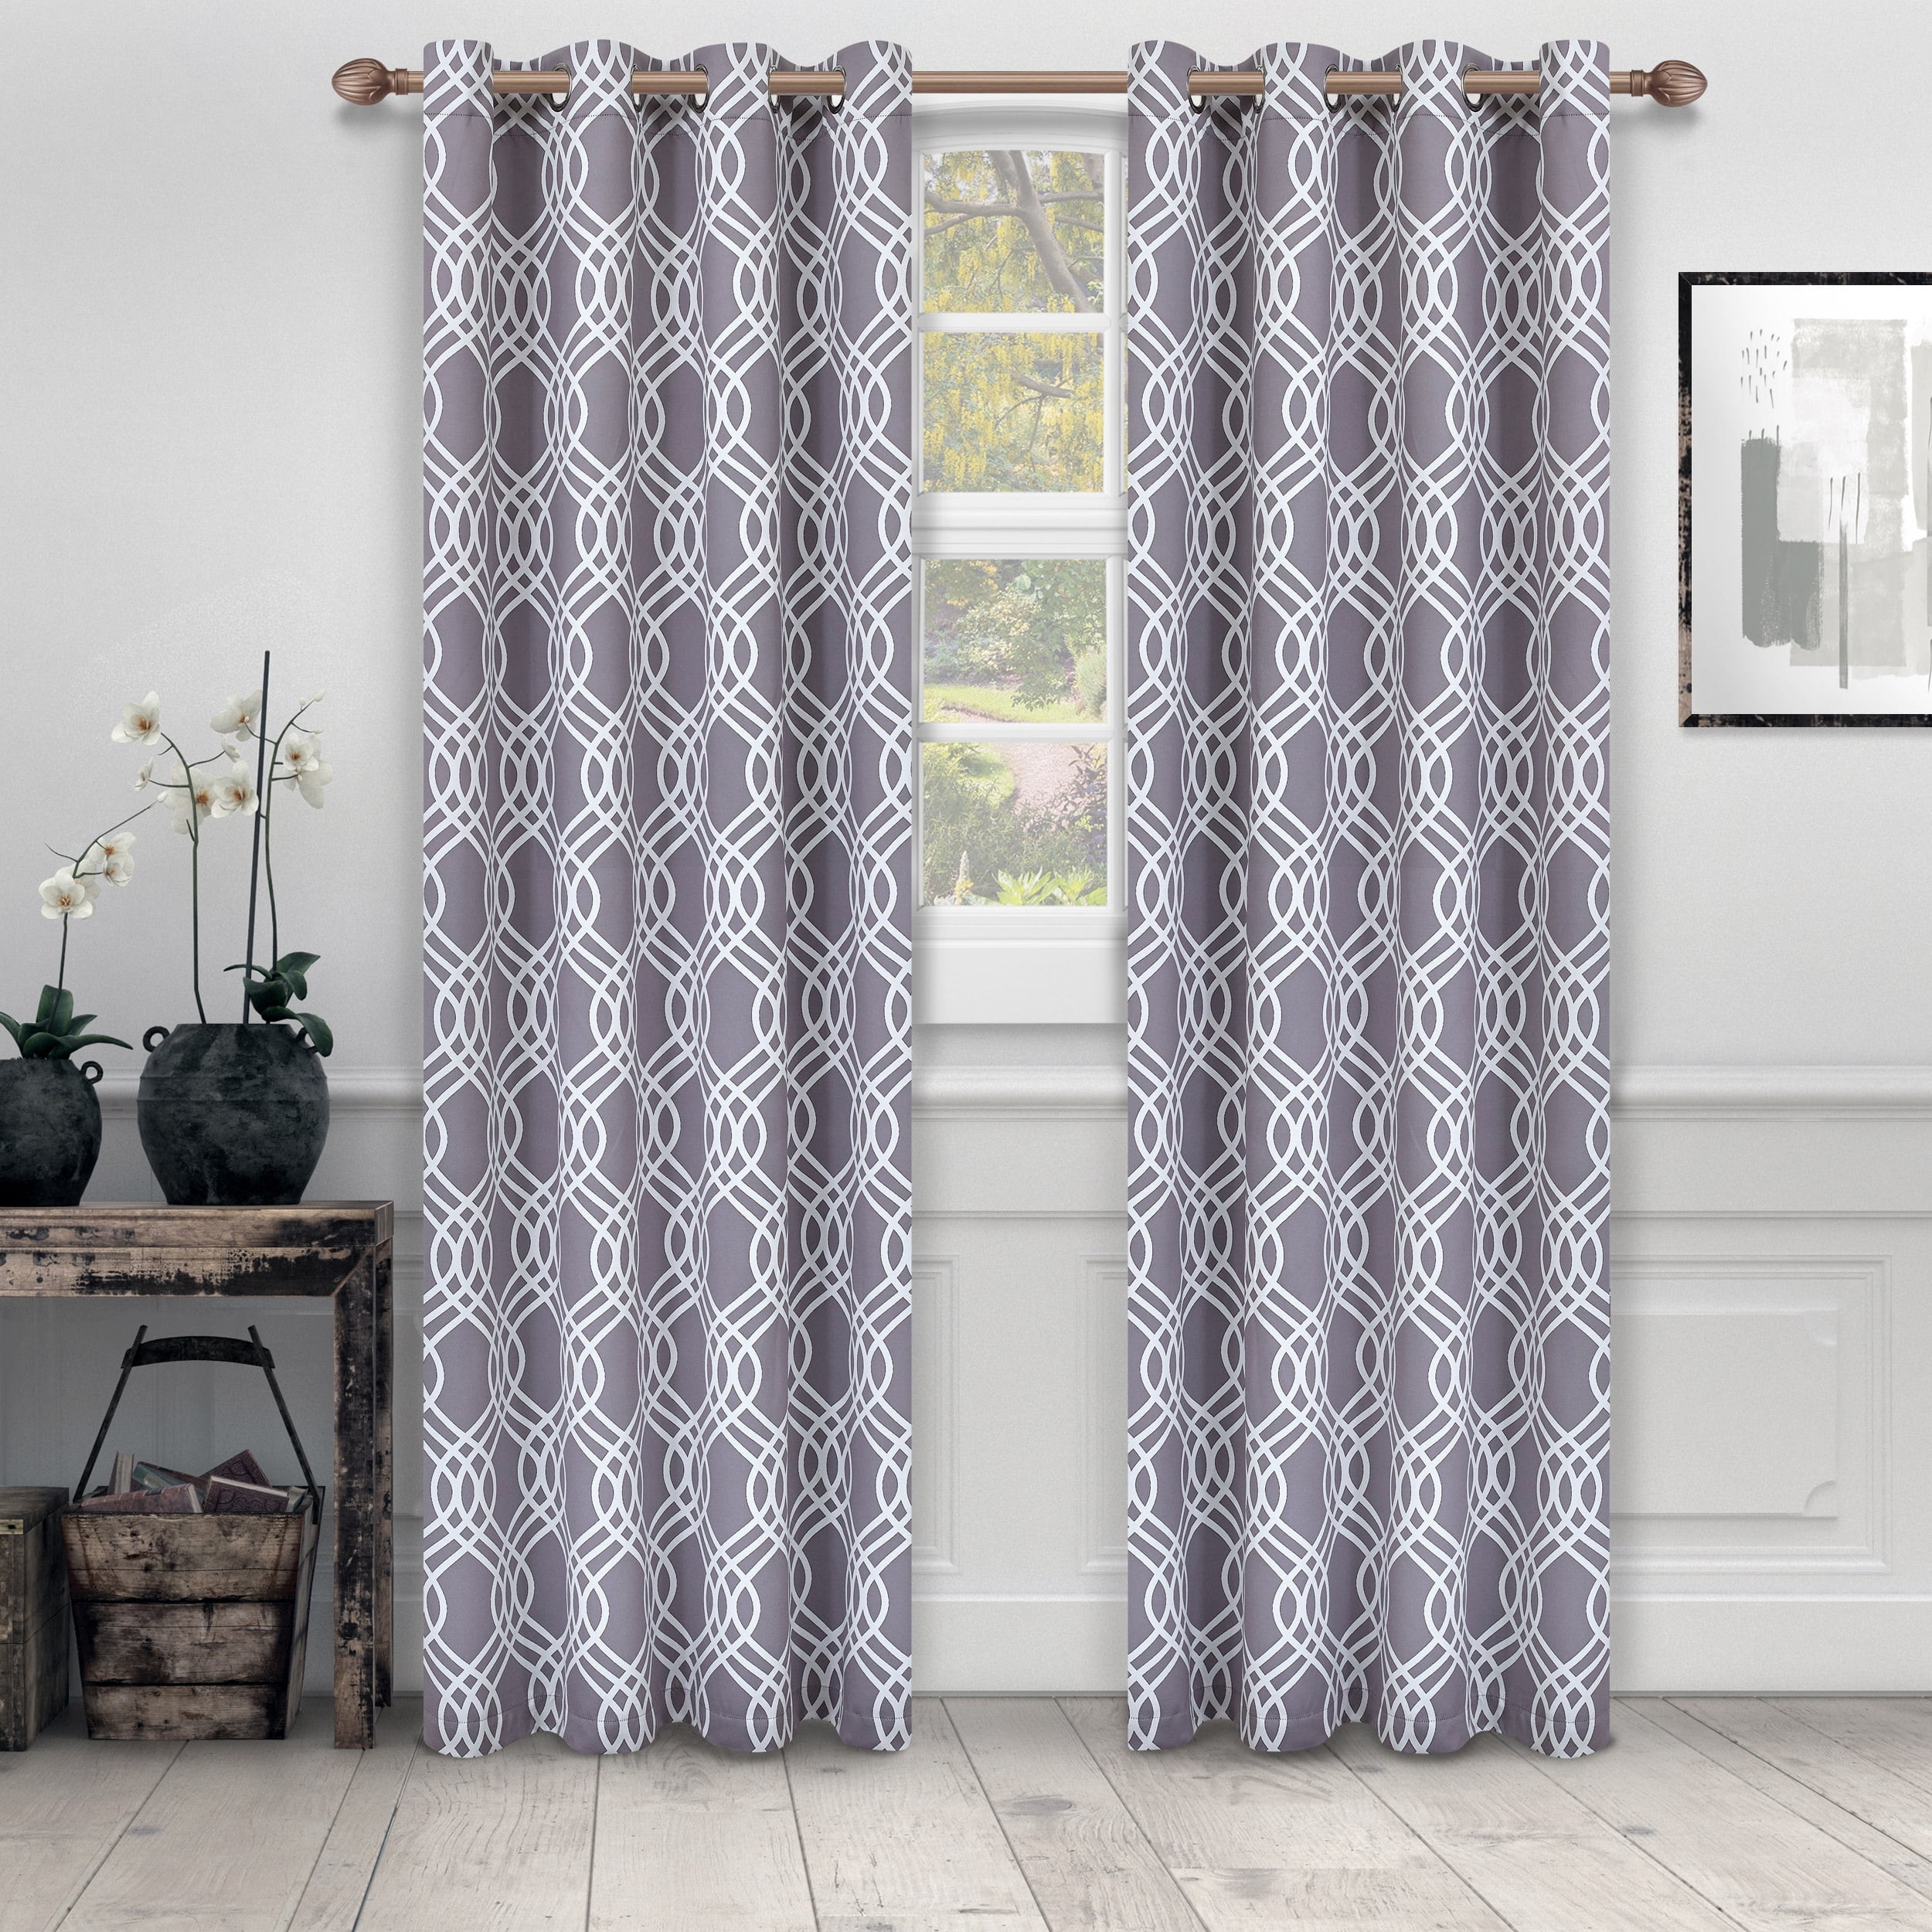 BITGAARIM / Easy Installation/Attachable Type Blackout Curtain Using  Compatible with Velcro Tape/Noi…See more BITGAARIM / Easy  Installation/Attachable